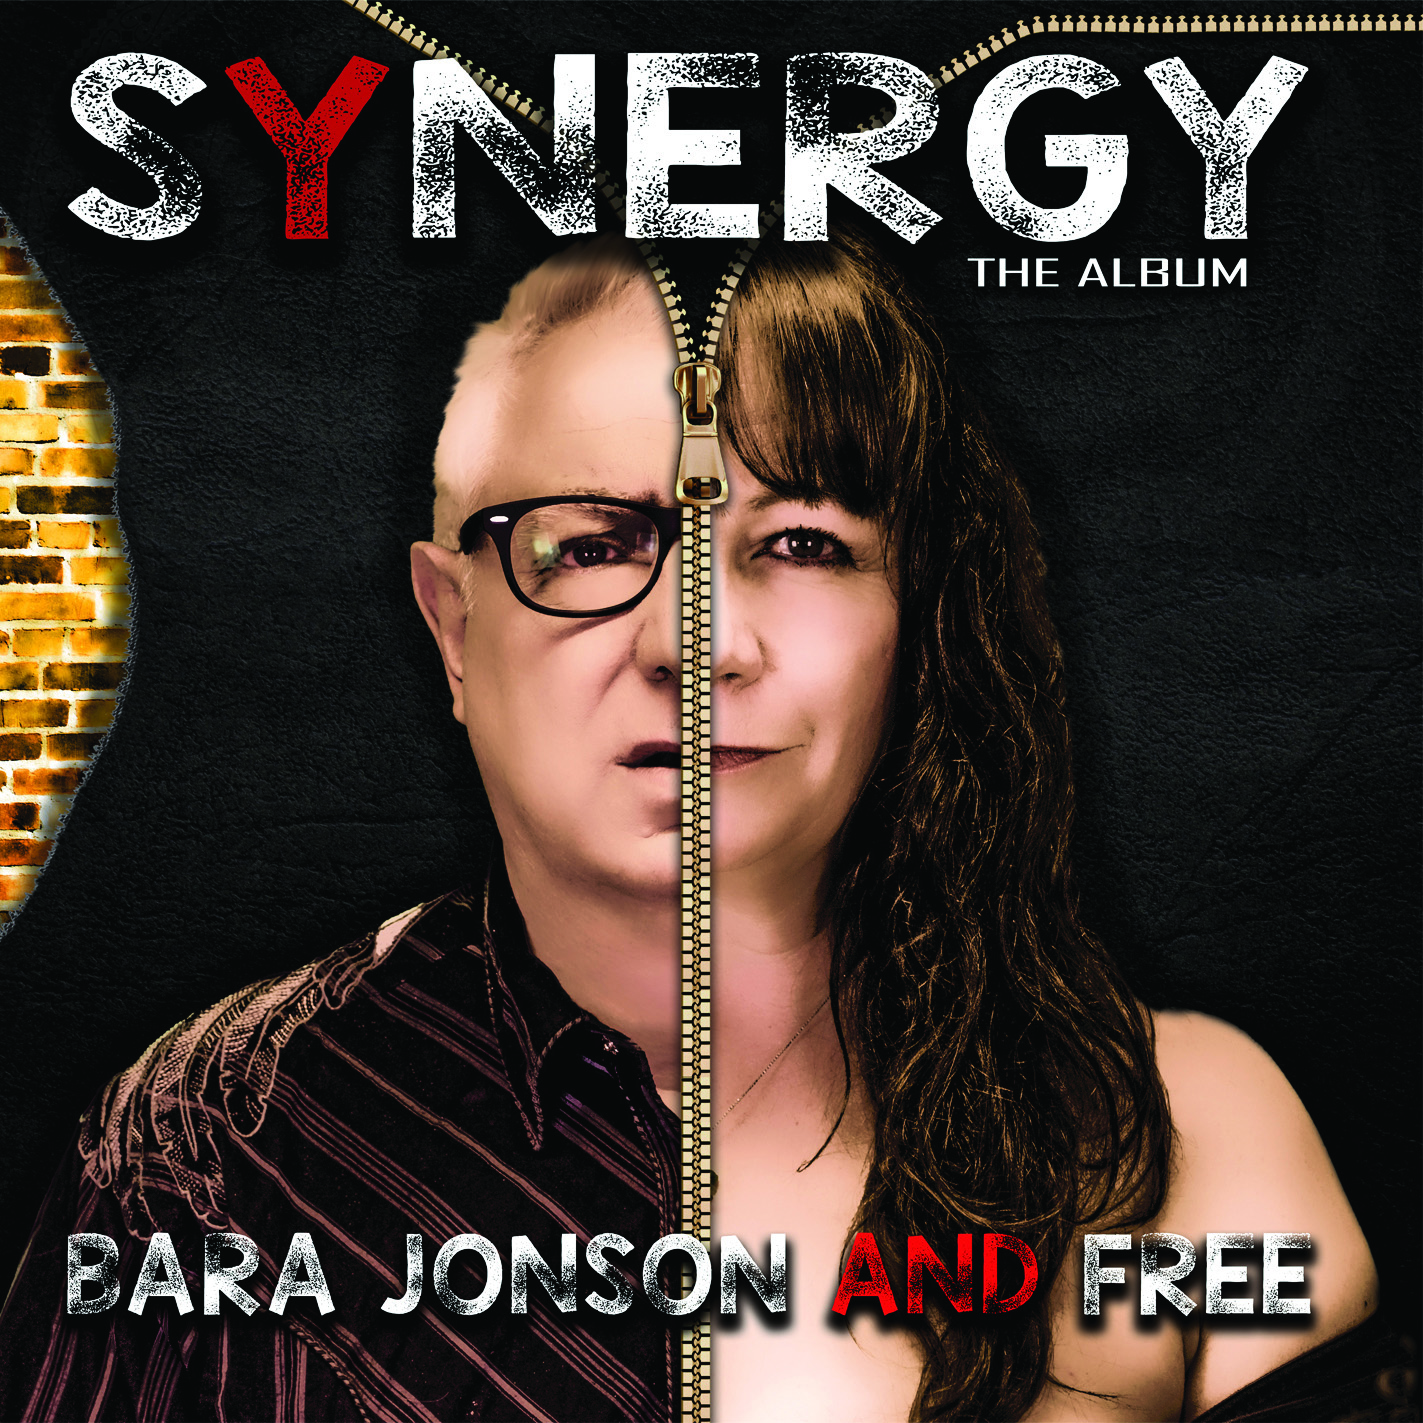 Synergy Cover